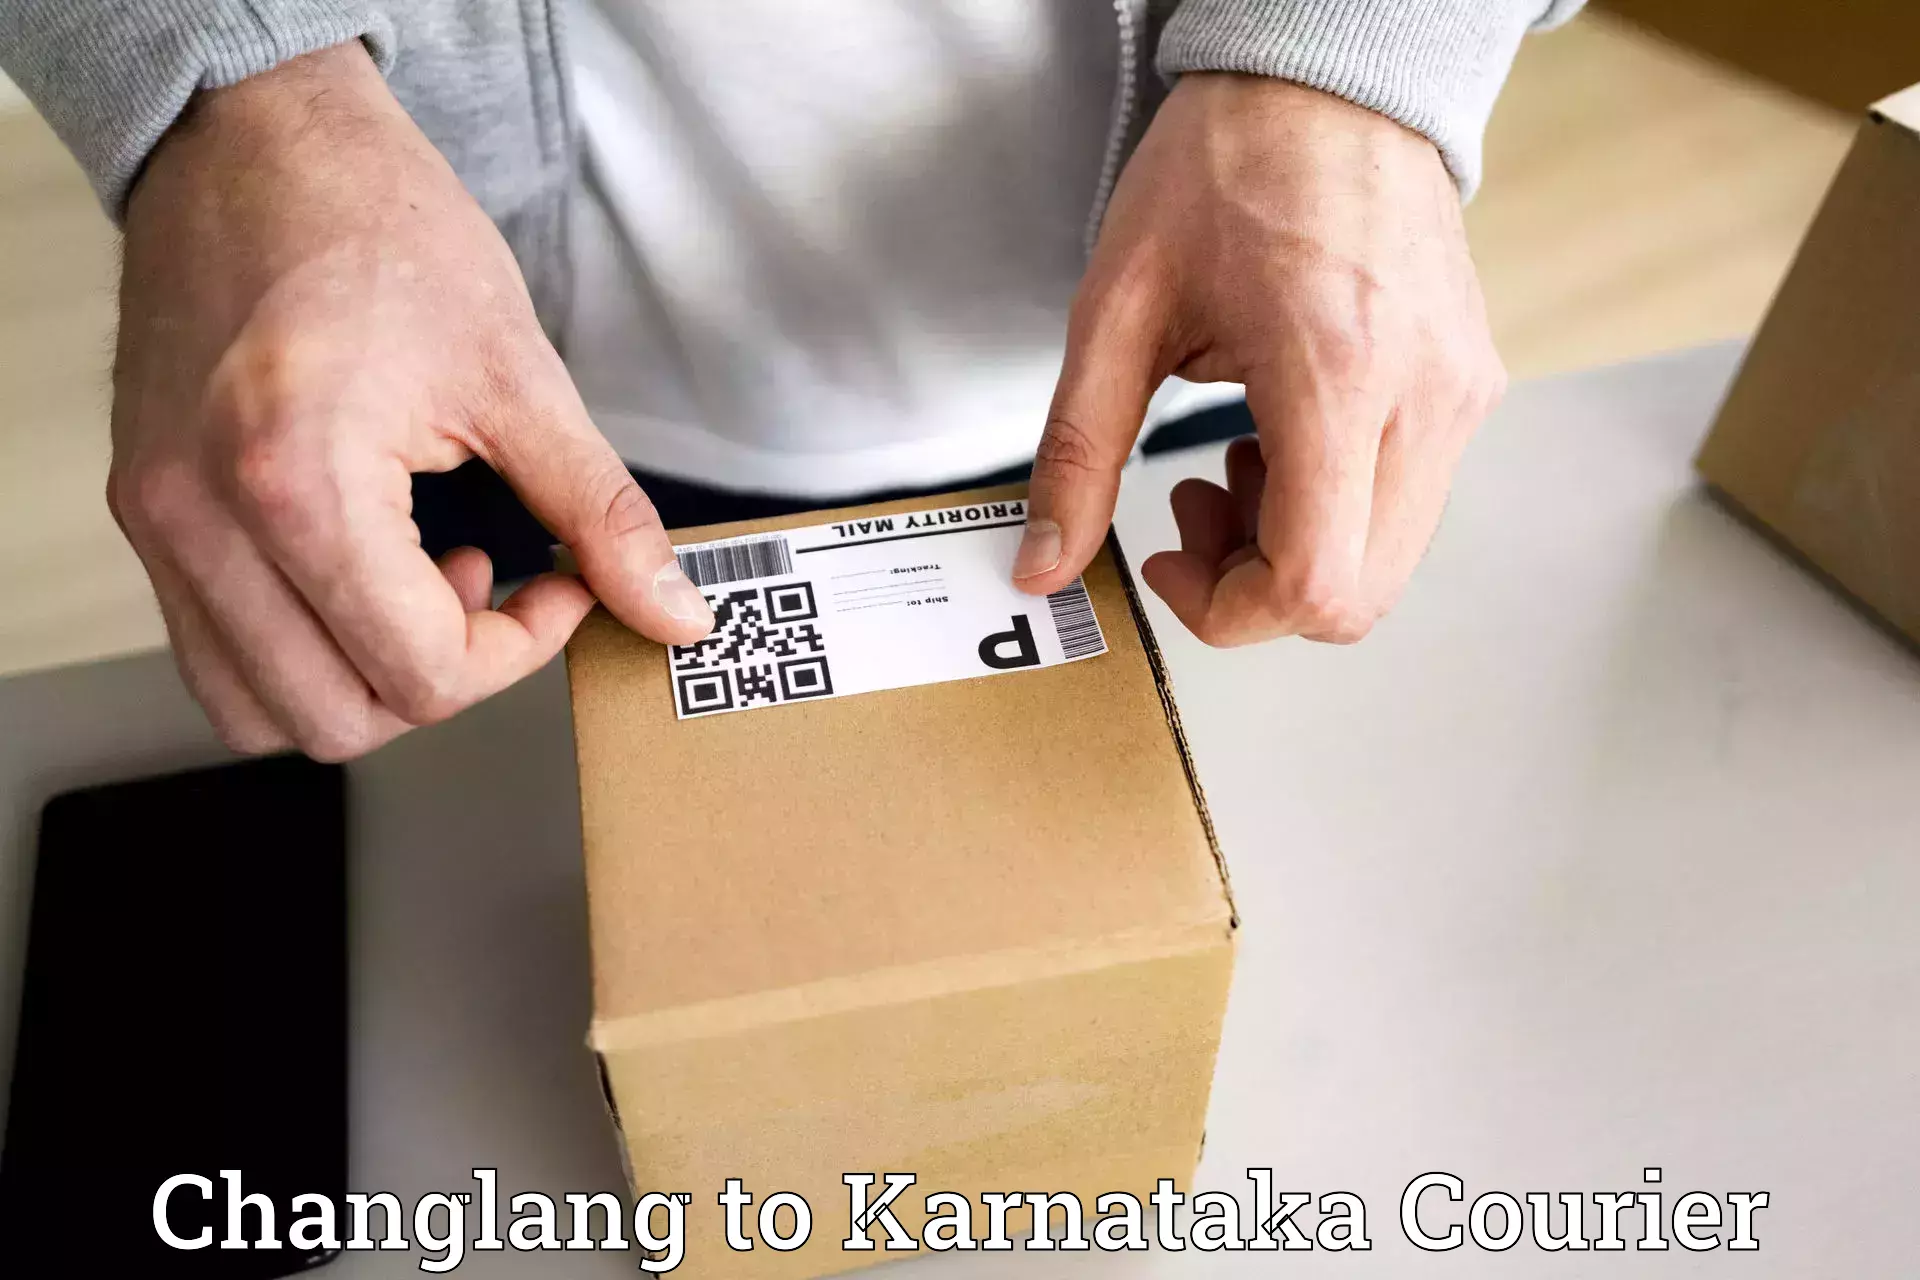 Fragile item shipping Changlang to Bhatkal